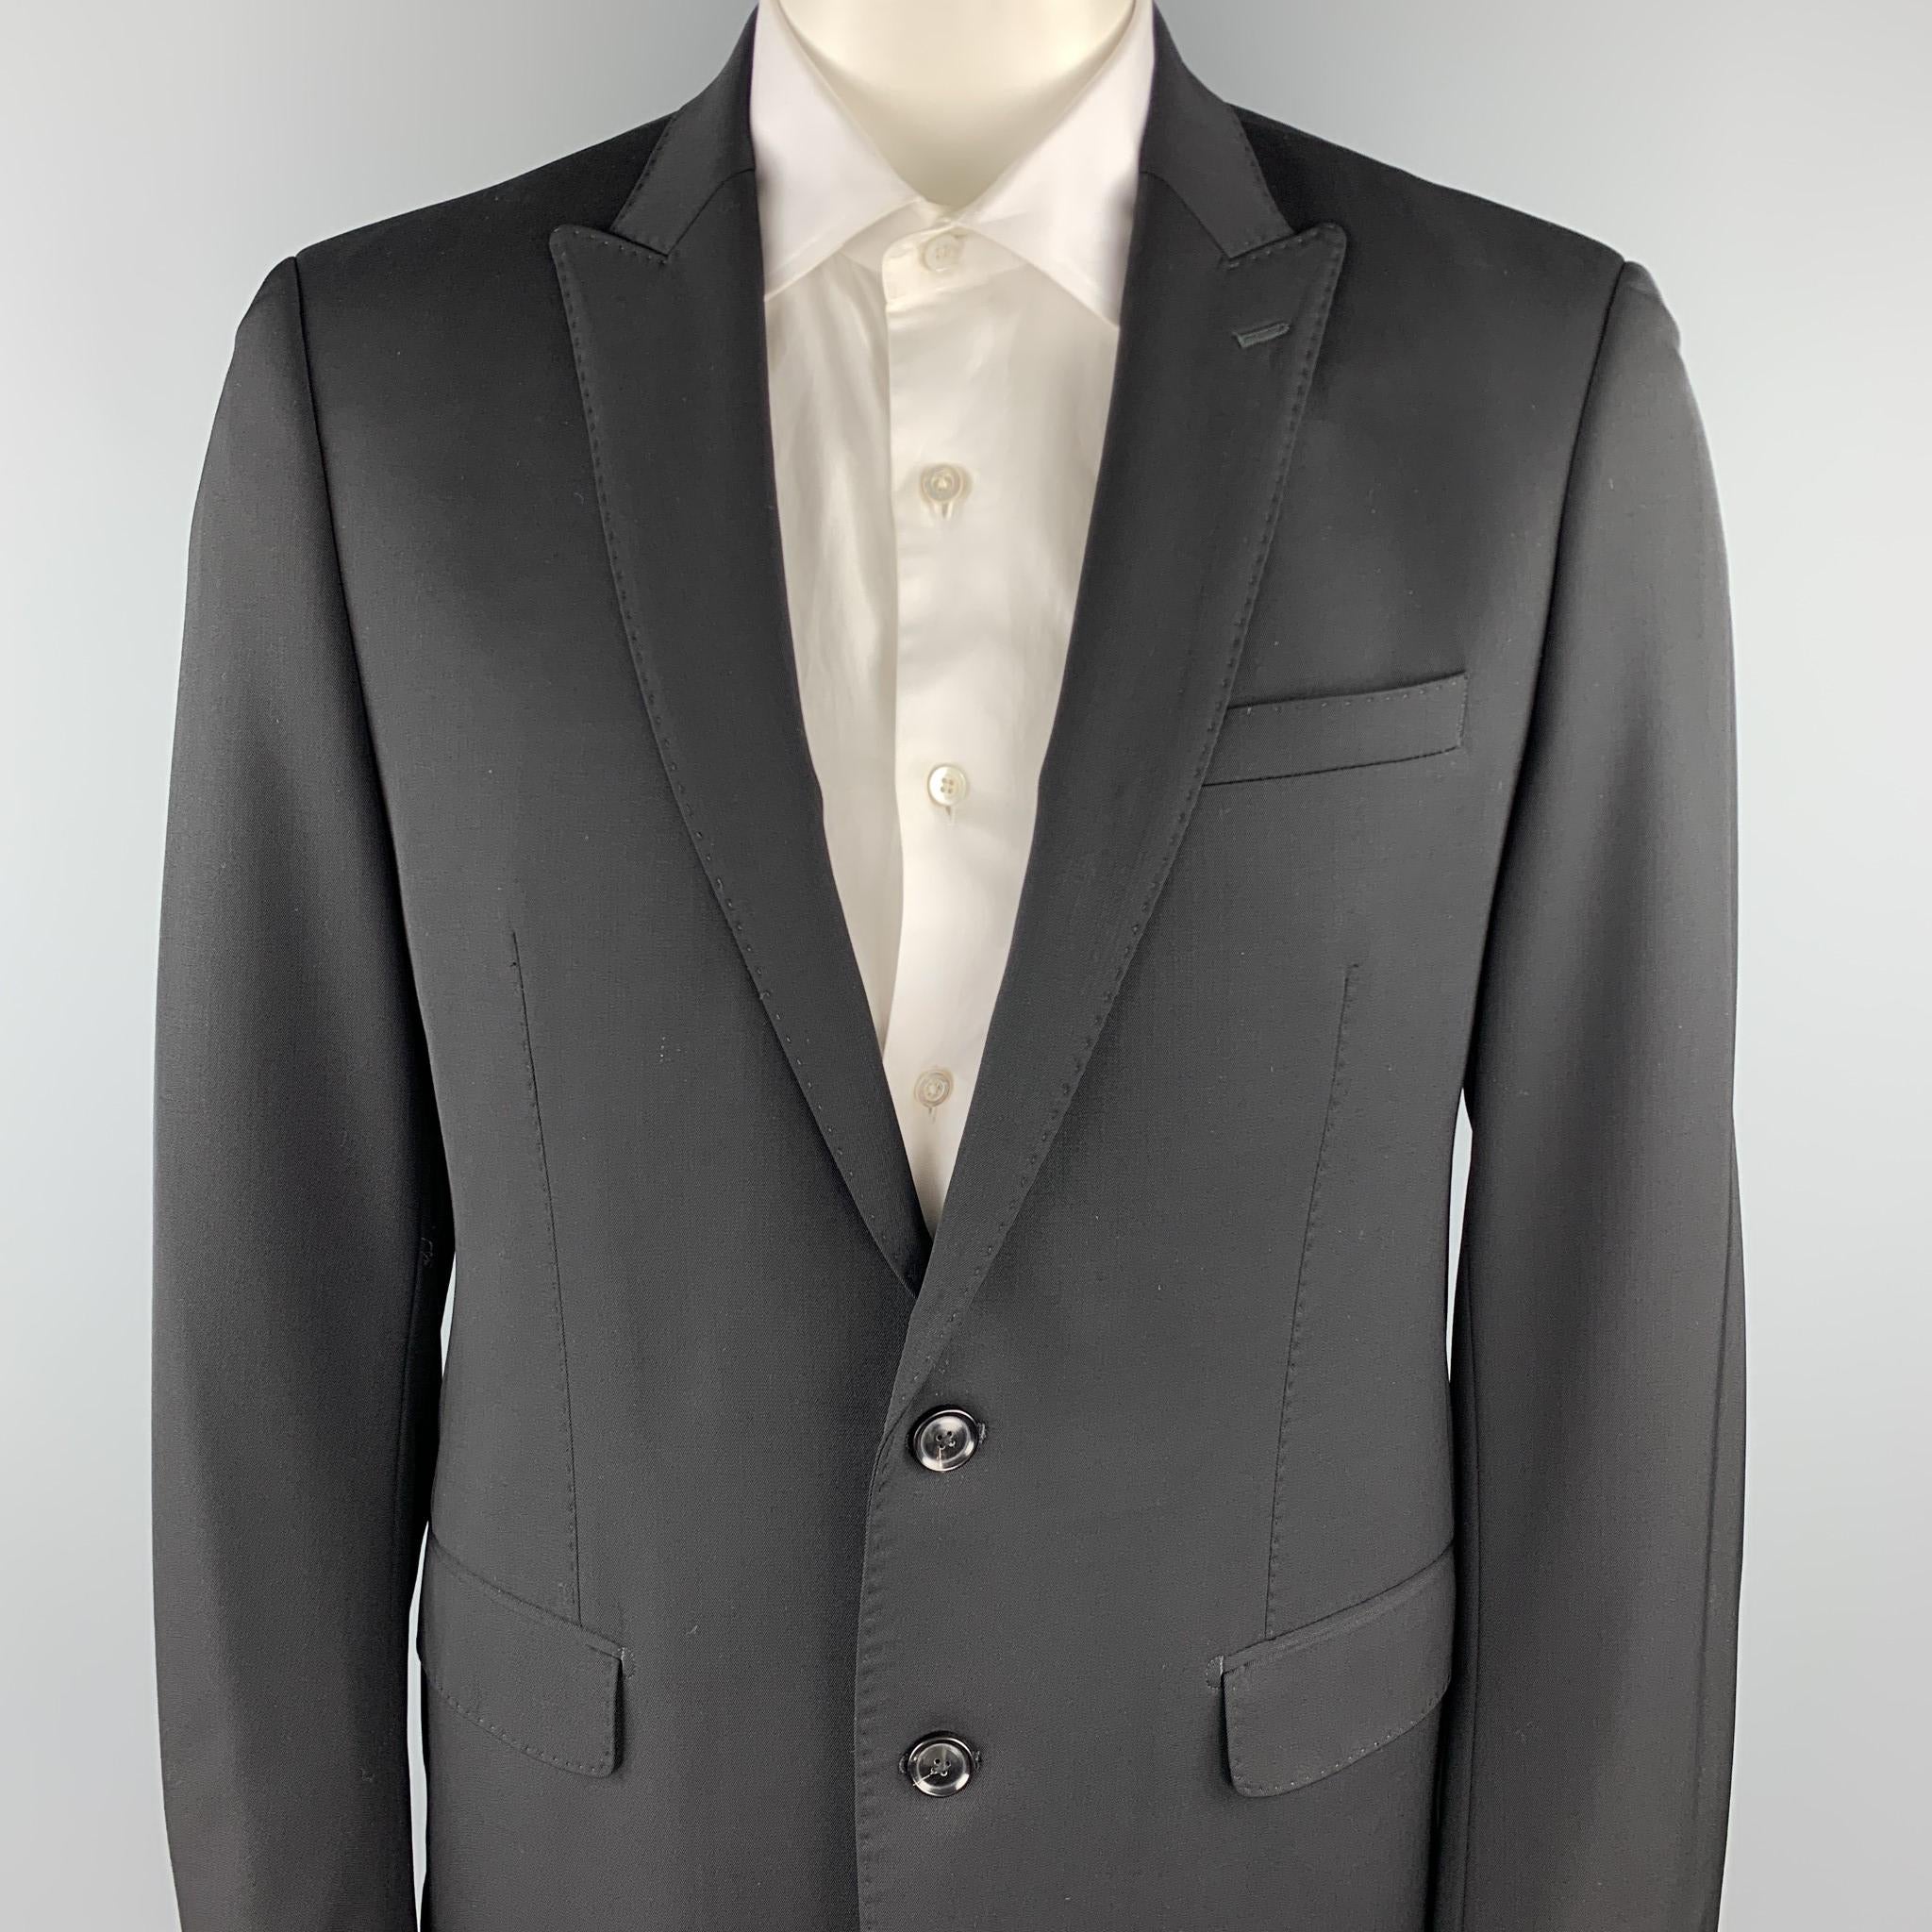 ELIE TAHARI sport coat comes in a black wool with a full liner featuring a peak lapel, flap pockets, and a two button closure.

Excellent Pre-Owned Condition.
Marked: 42 R

Measurements:

Shoulder: 19 in. 
Chest: 42 in. 
Sleeve: 27 in. 
Length: 29.5